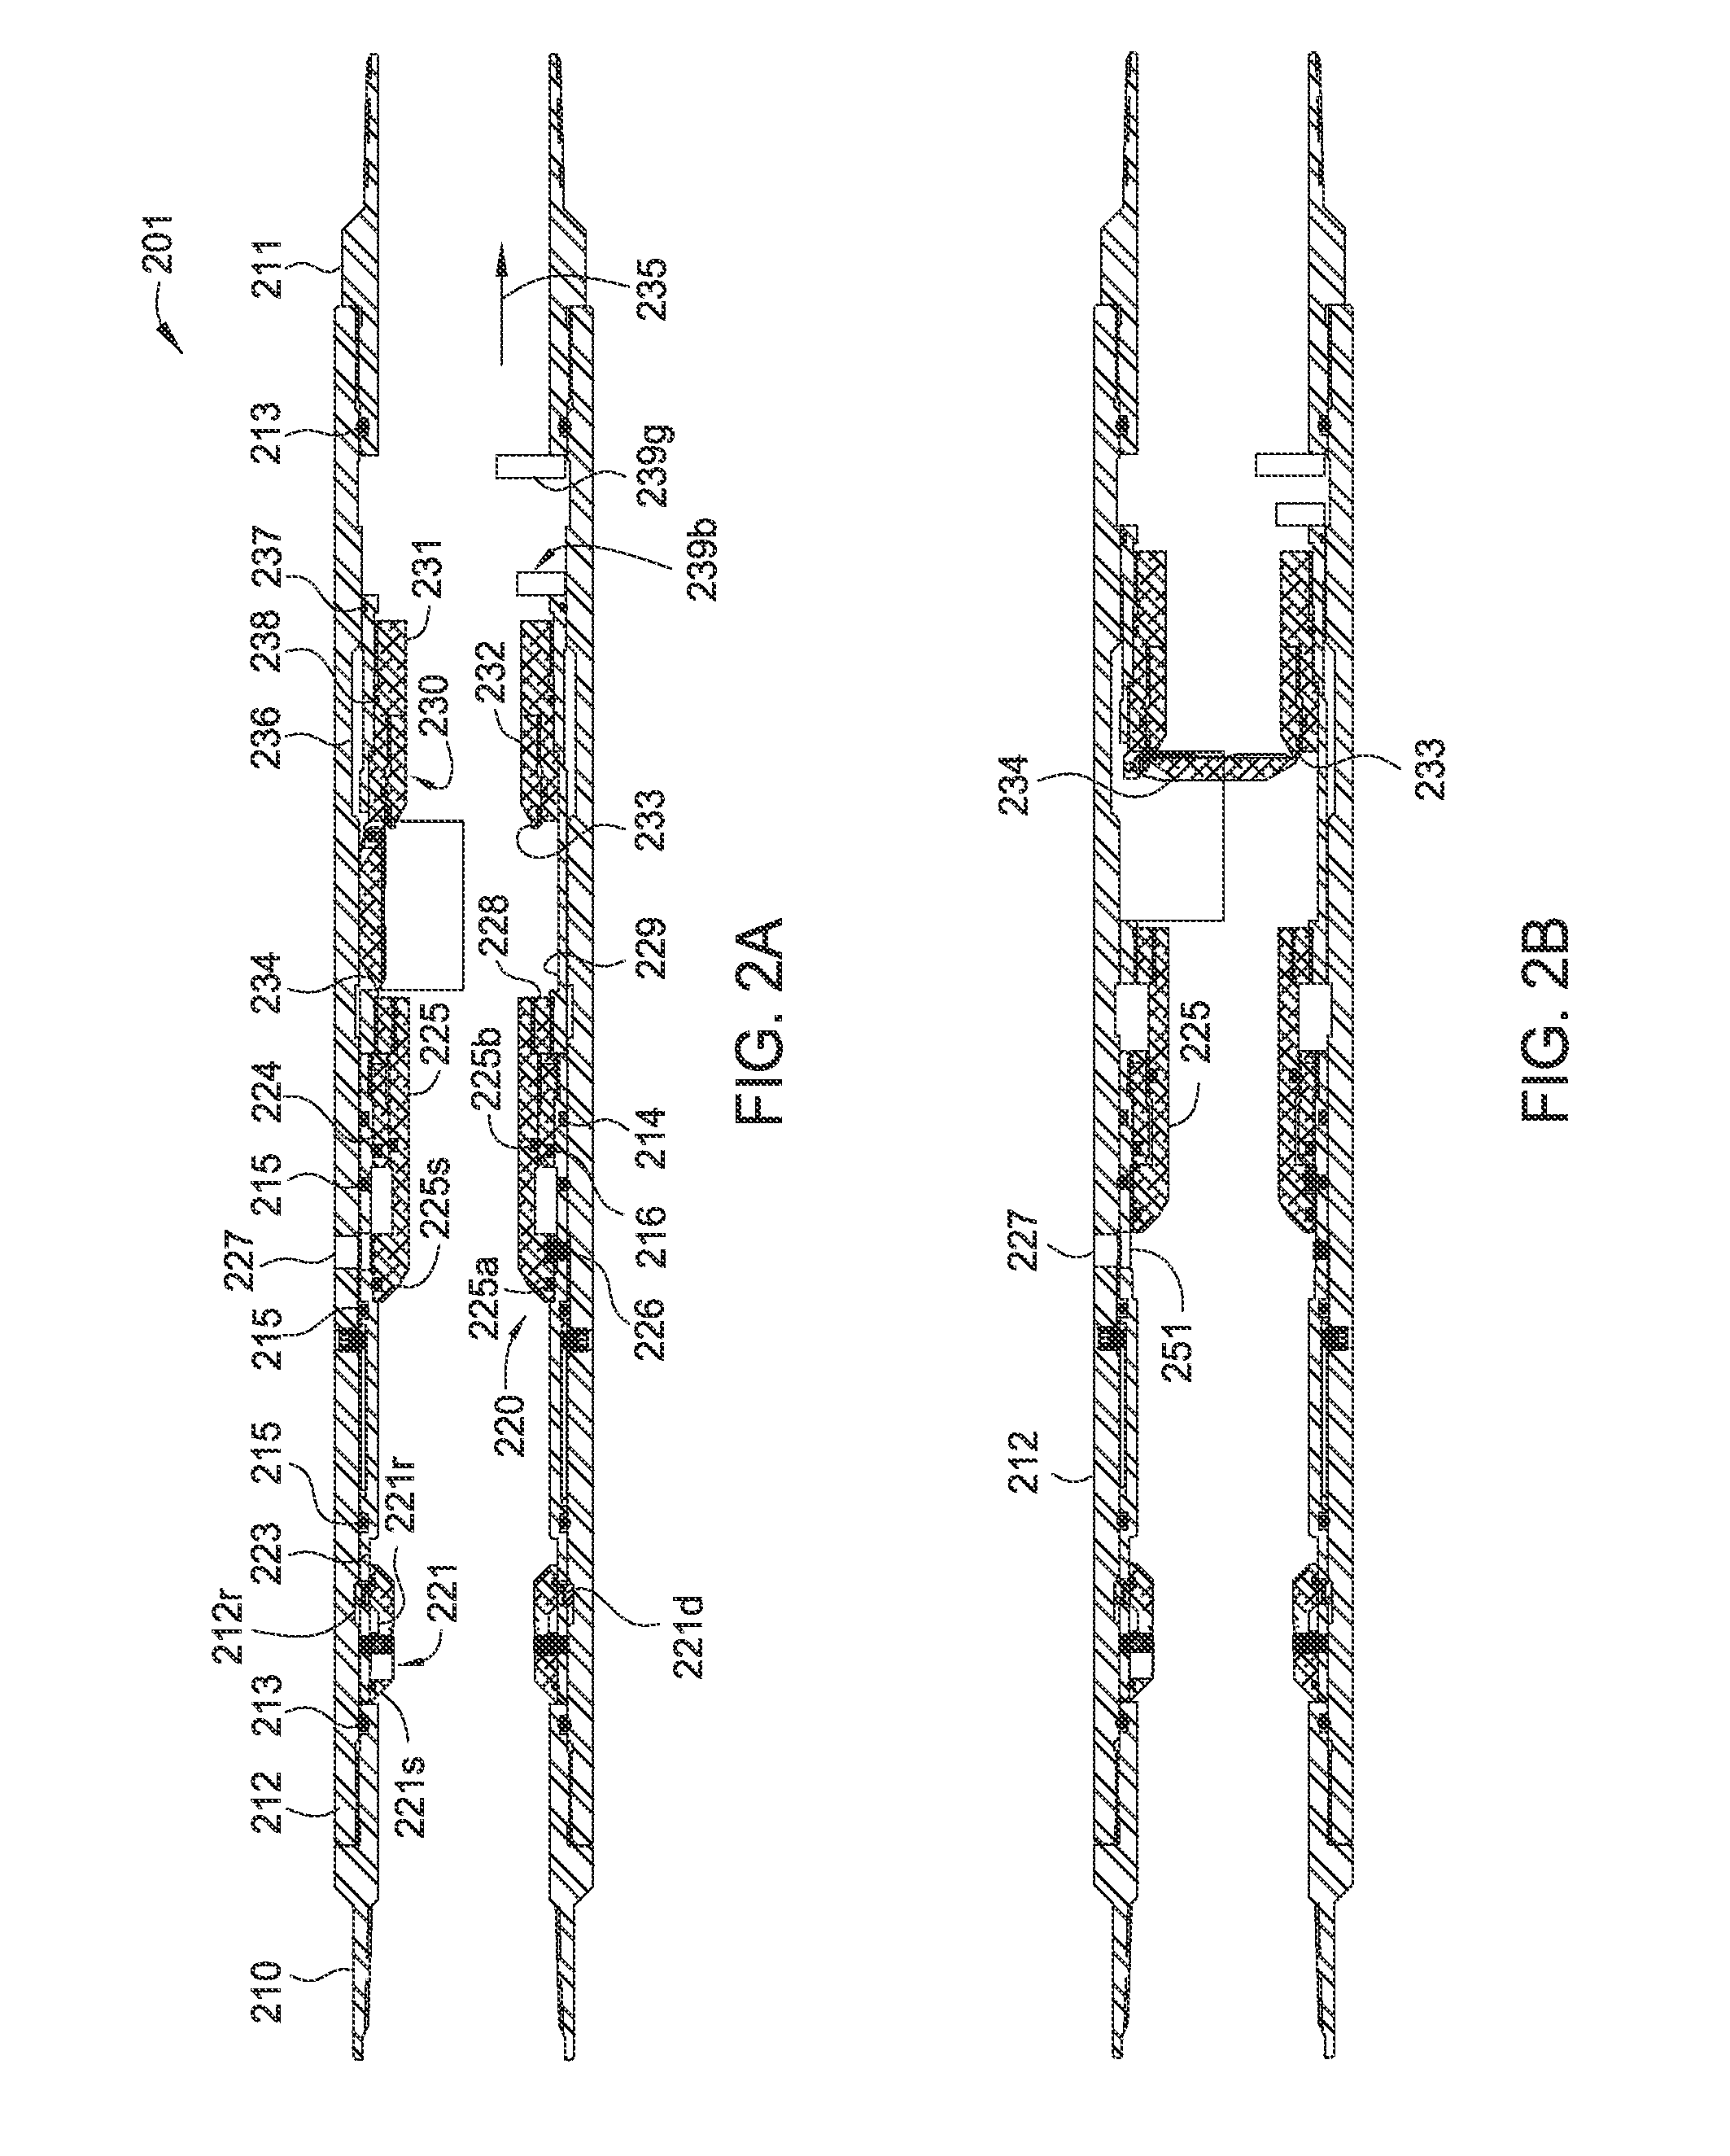 Stage tool with lower tubing isolation